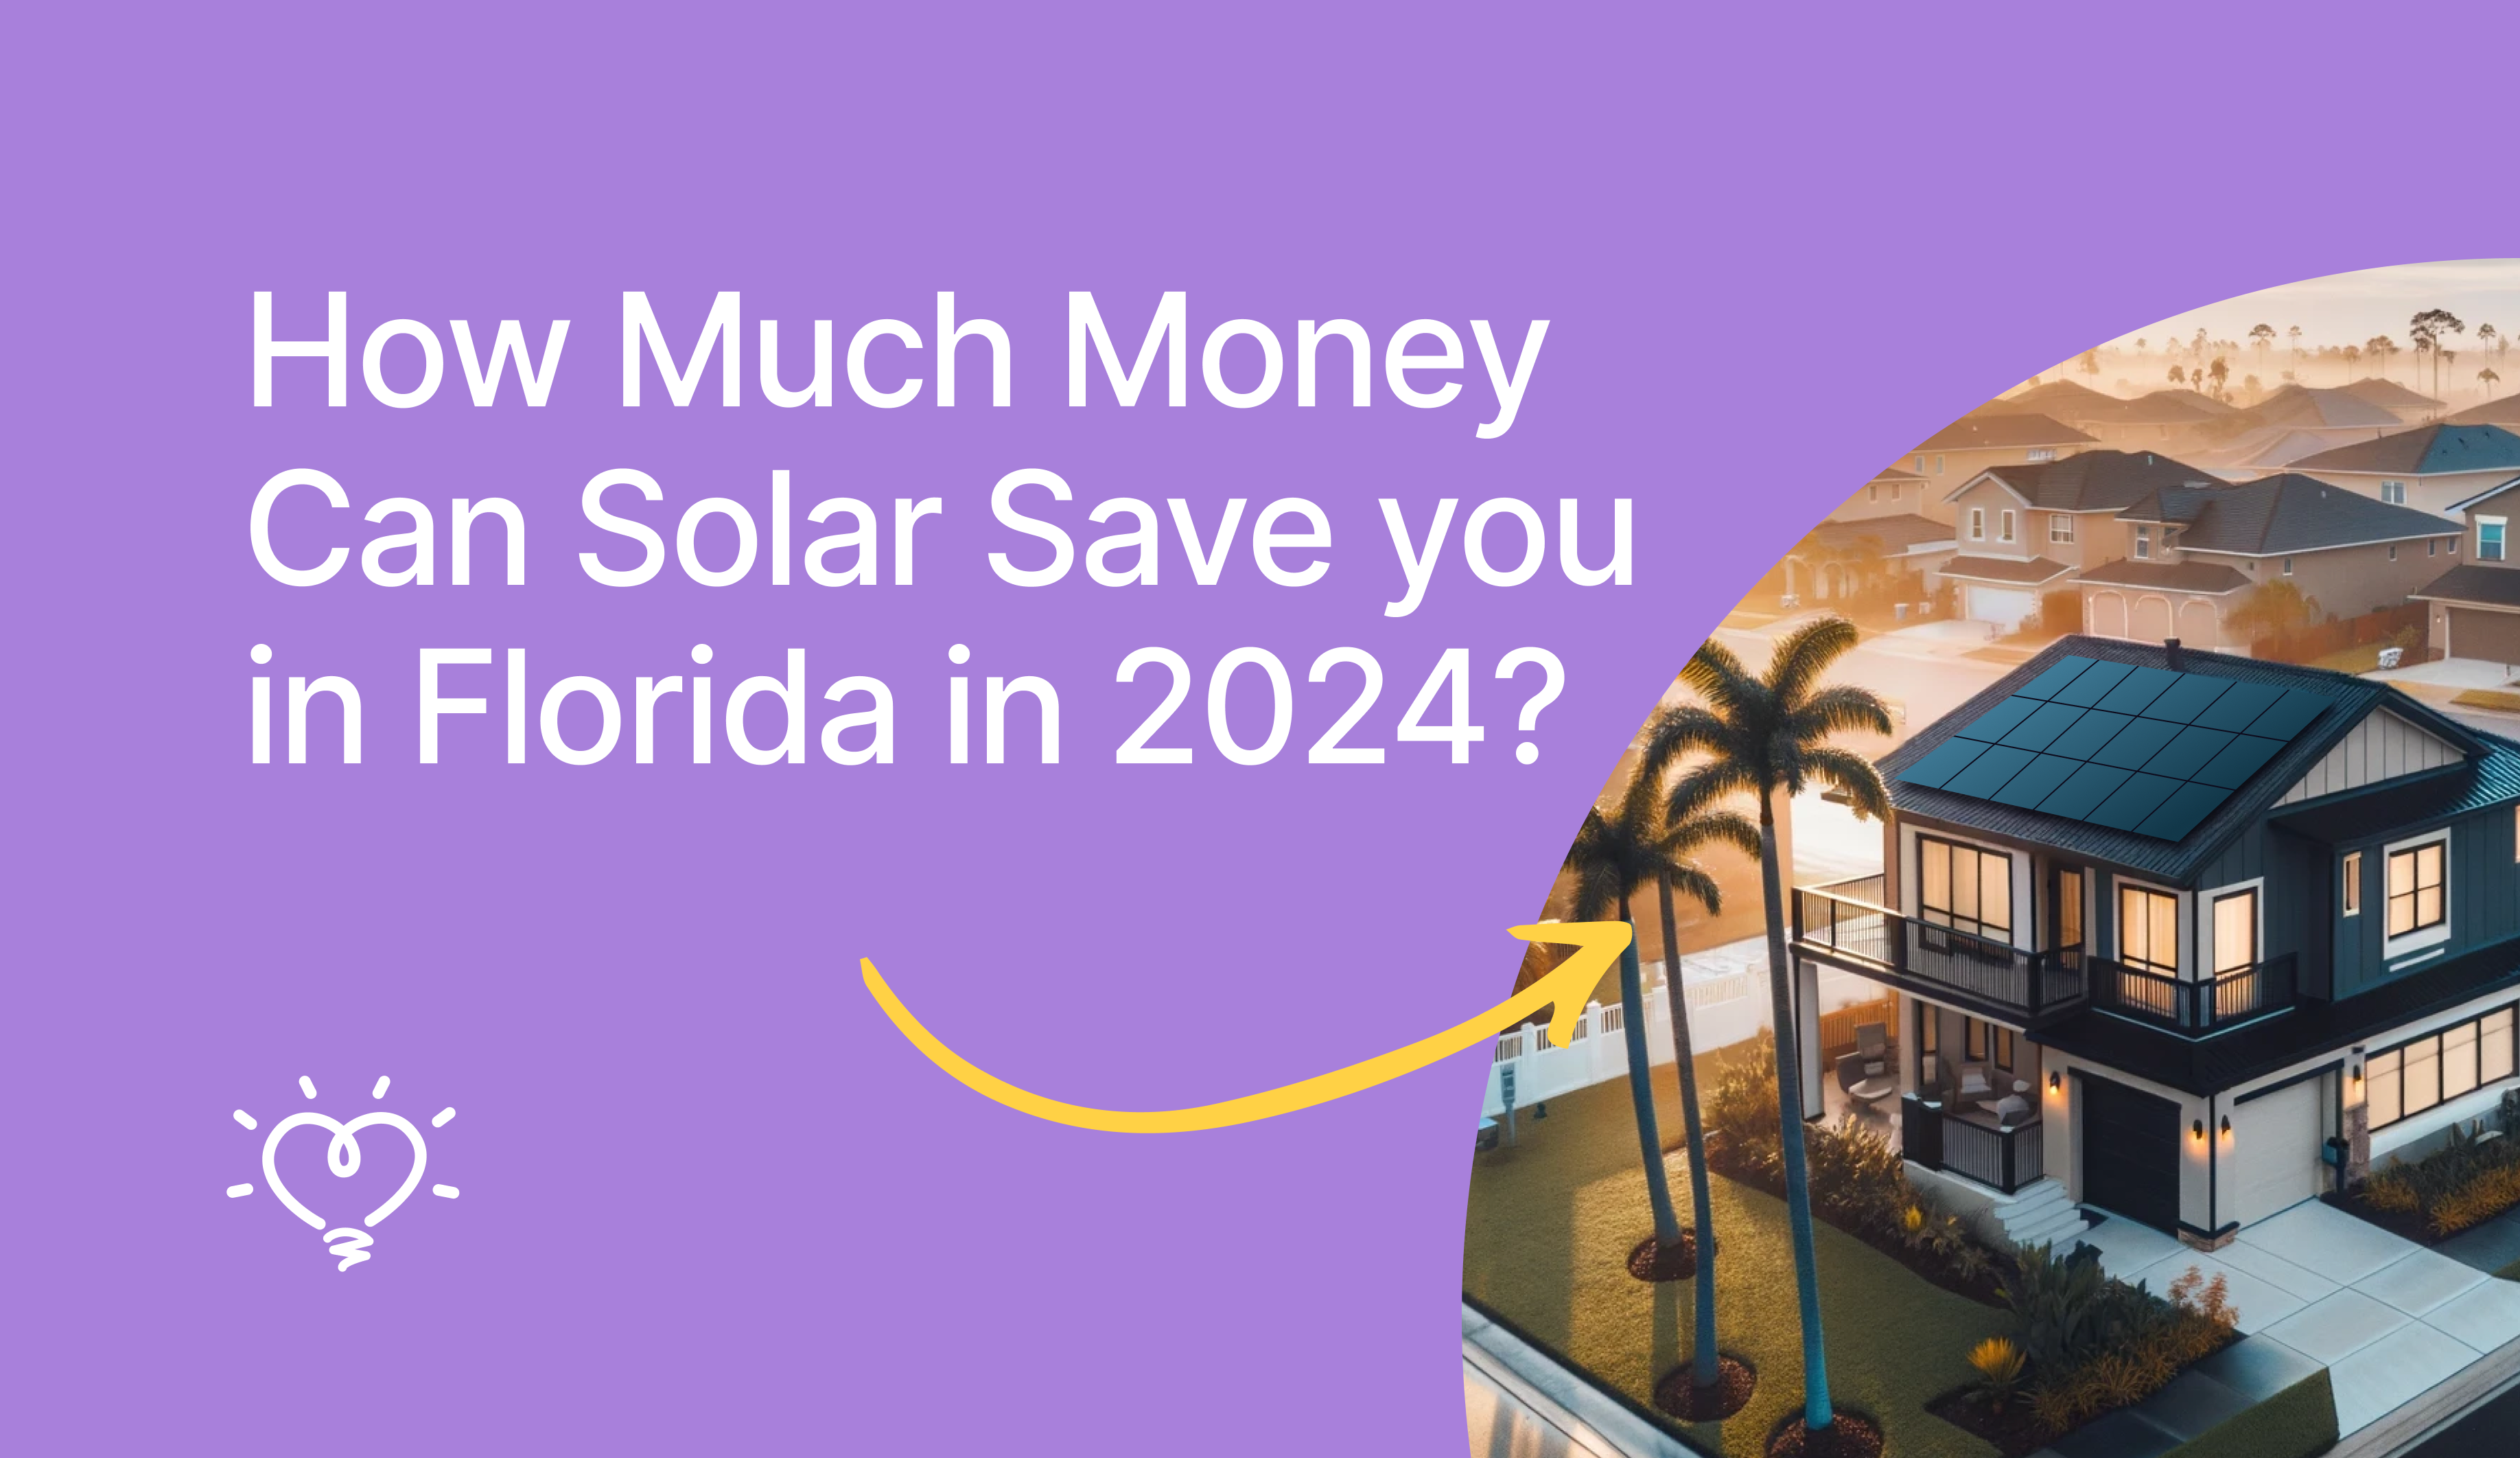 How Much Money Can Solar Save you in Florida in 2024?